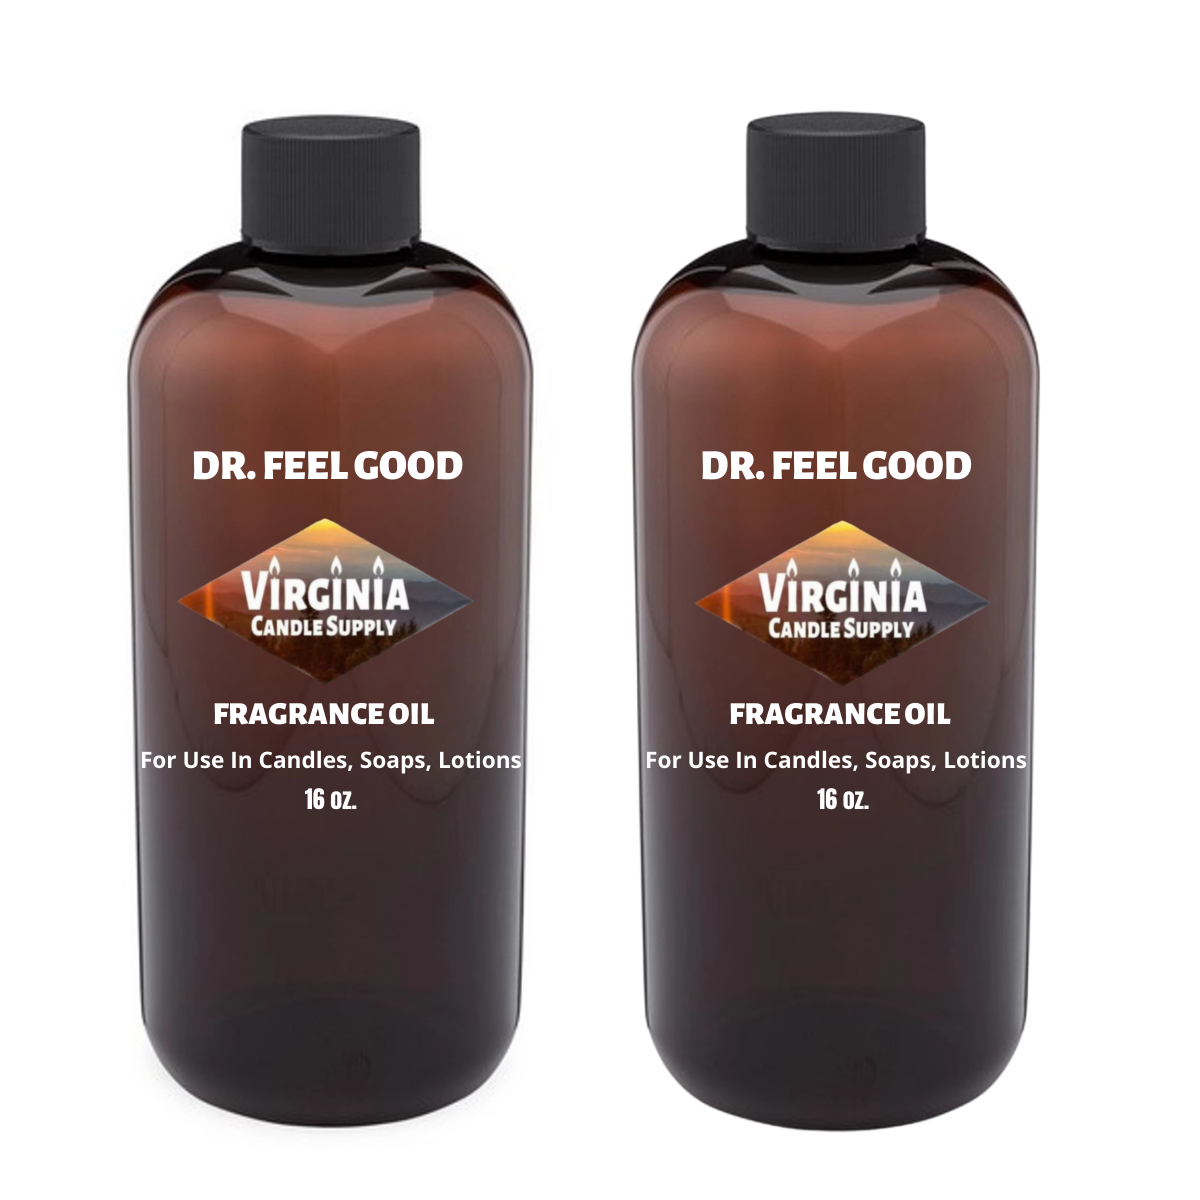 Dr. Feel Good Fragrance Oil (Our Version of the Brand Name) (32 oz Bottle)  for Candle Making, Soap Making, Tart Making, Room Sprays, Lotions, Car  Fresheners, Slime, Bath Bombs, Warmers…